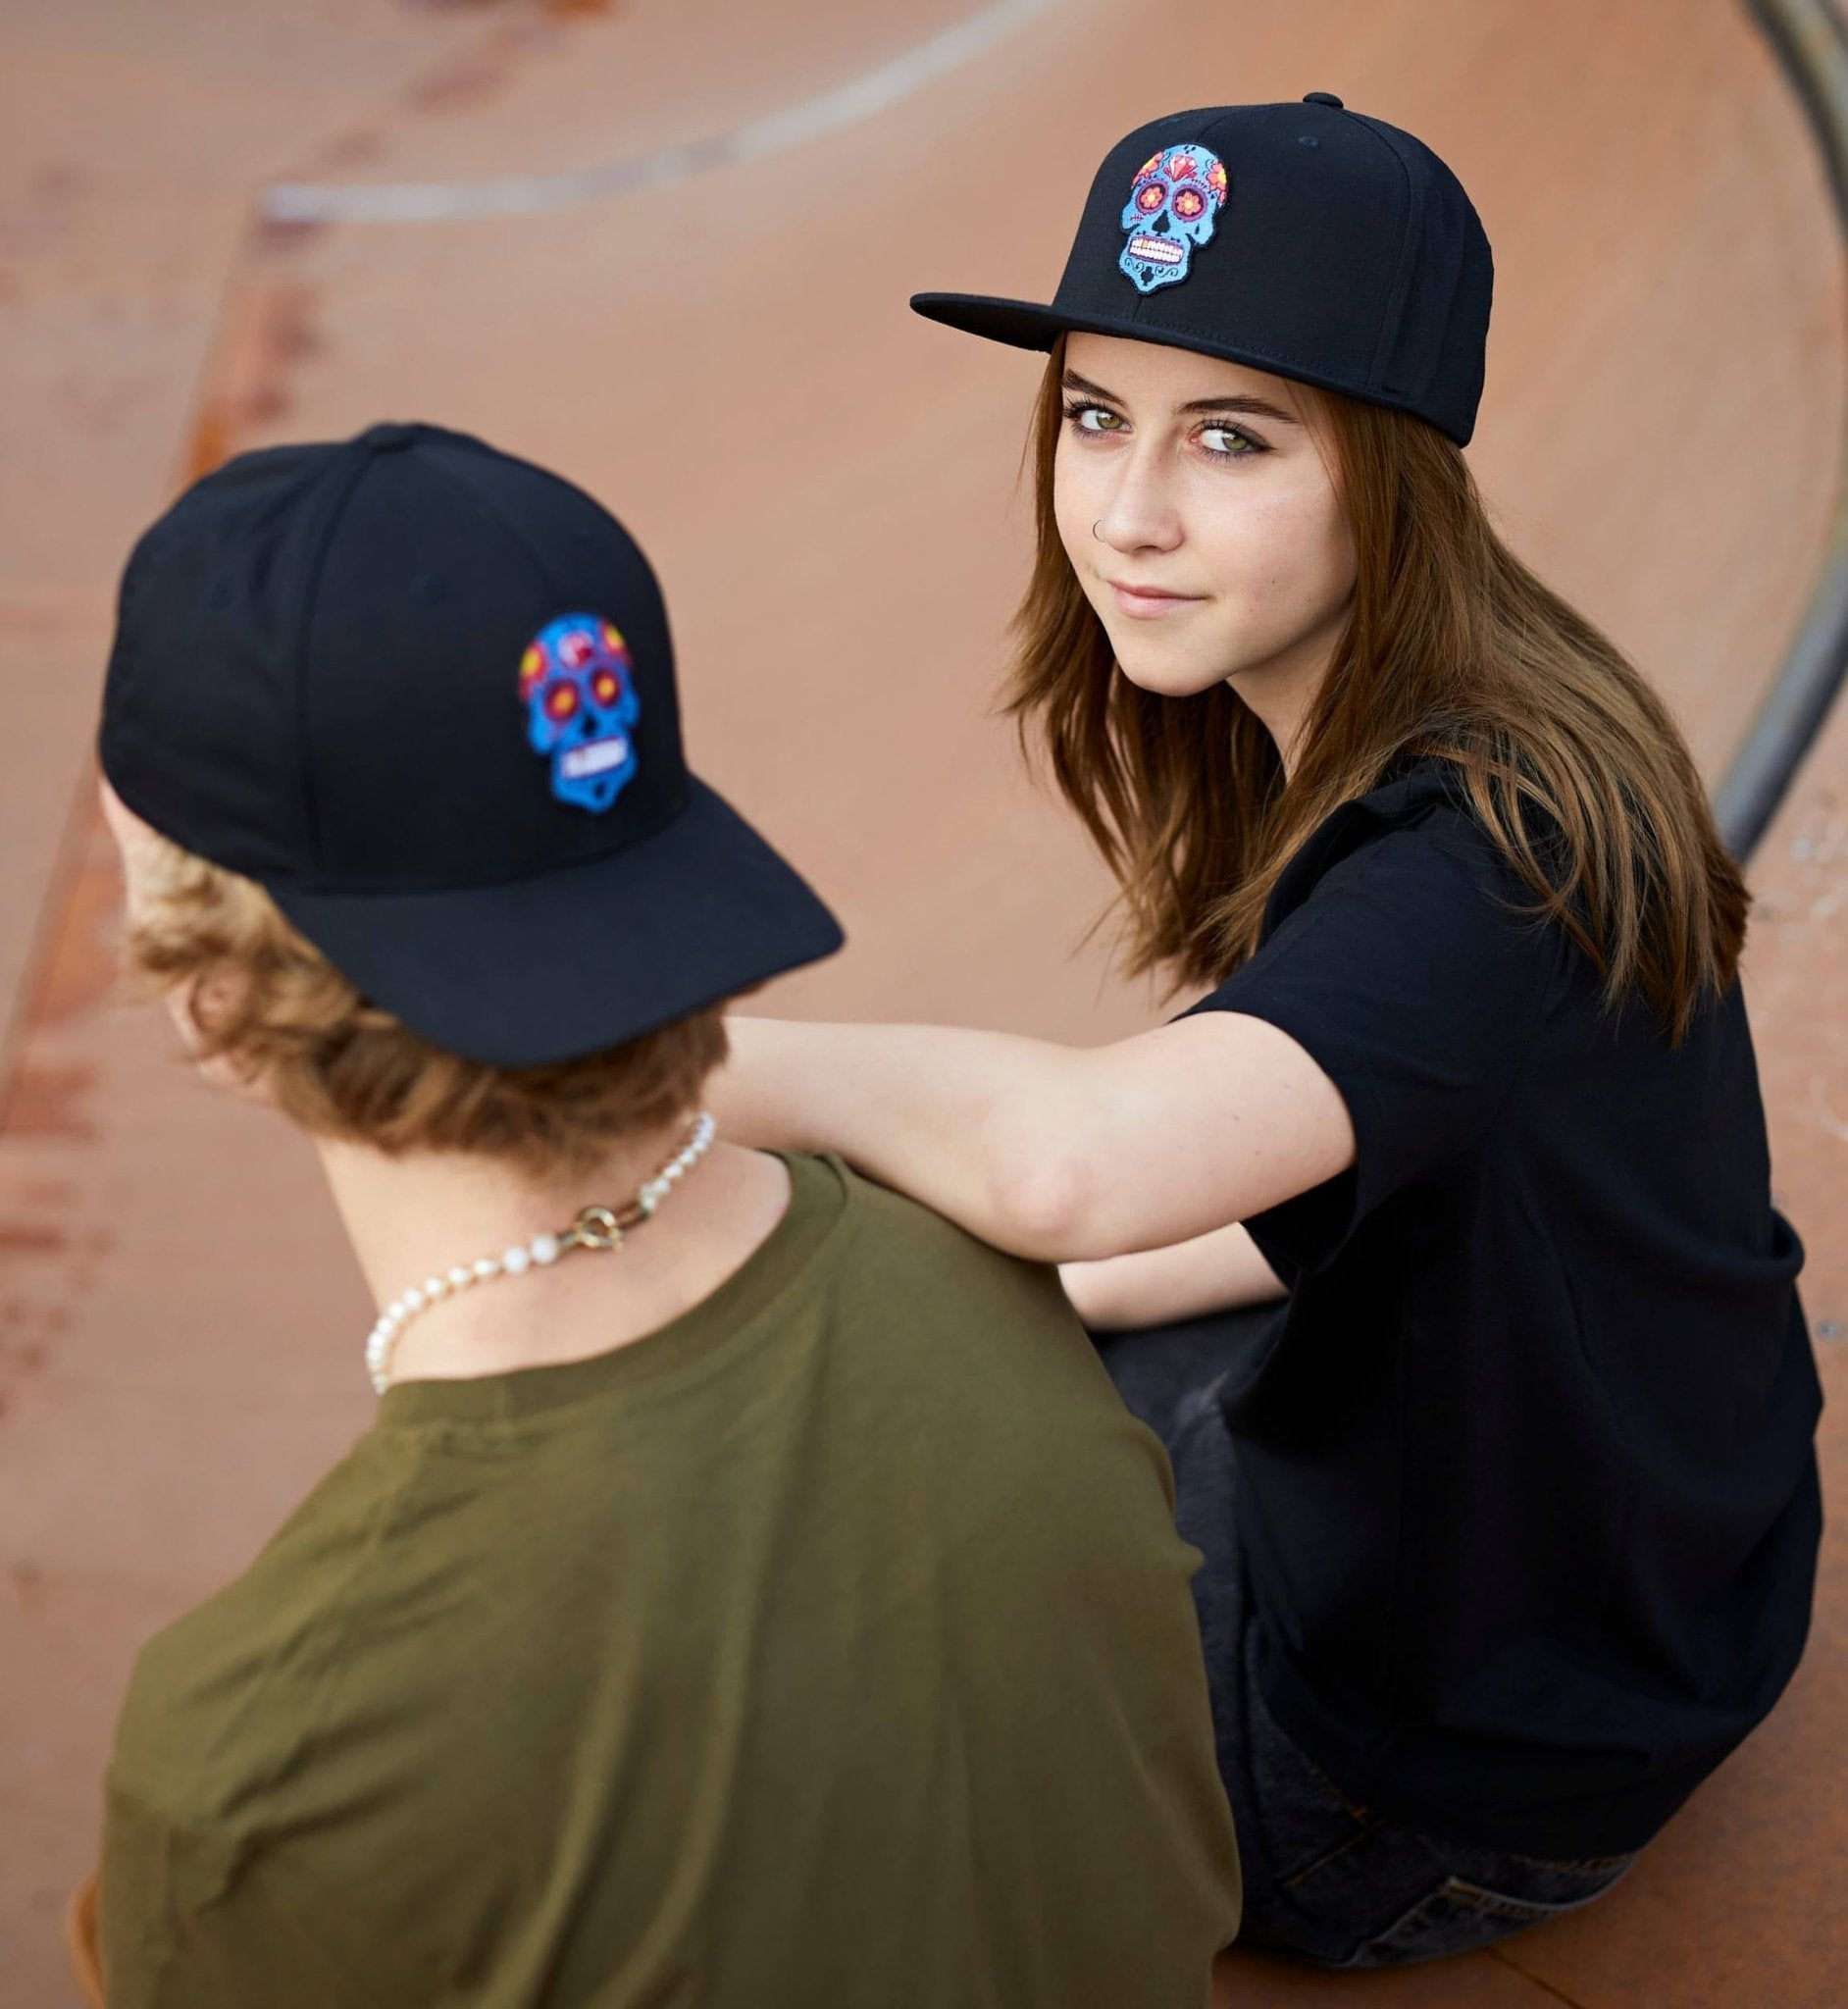 CSW Fitted Baseball Cap - Comeback Streetwear